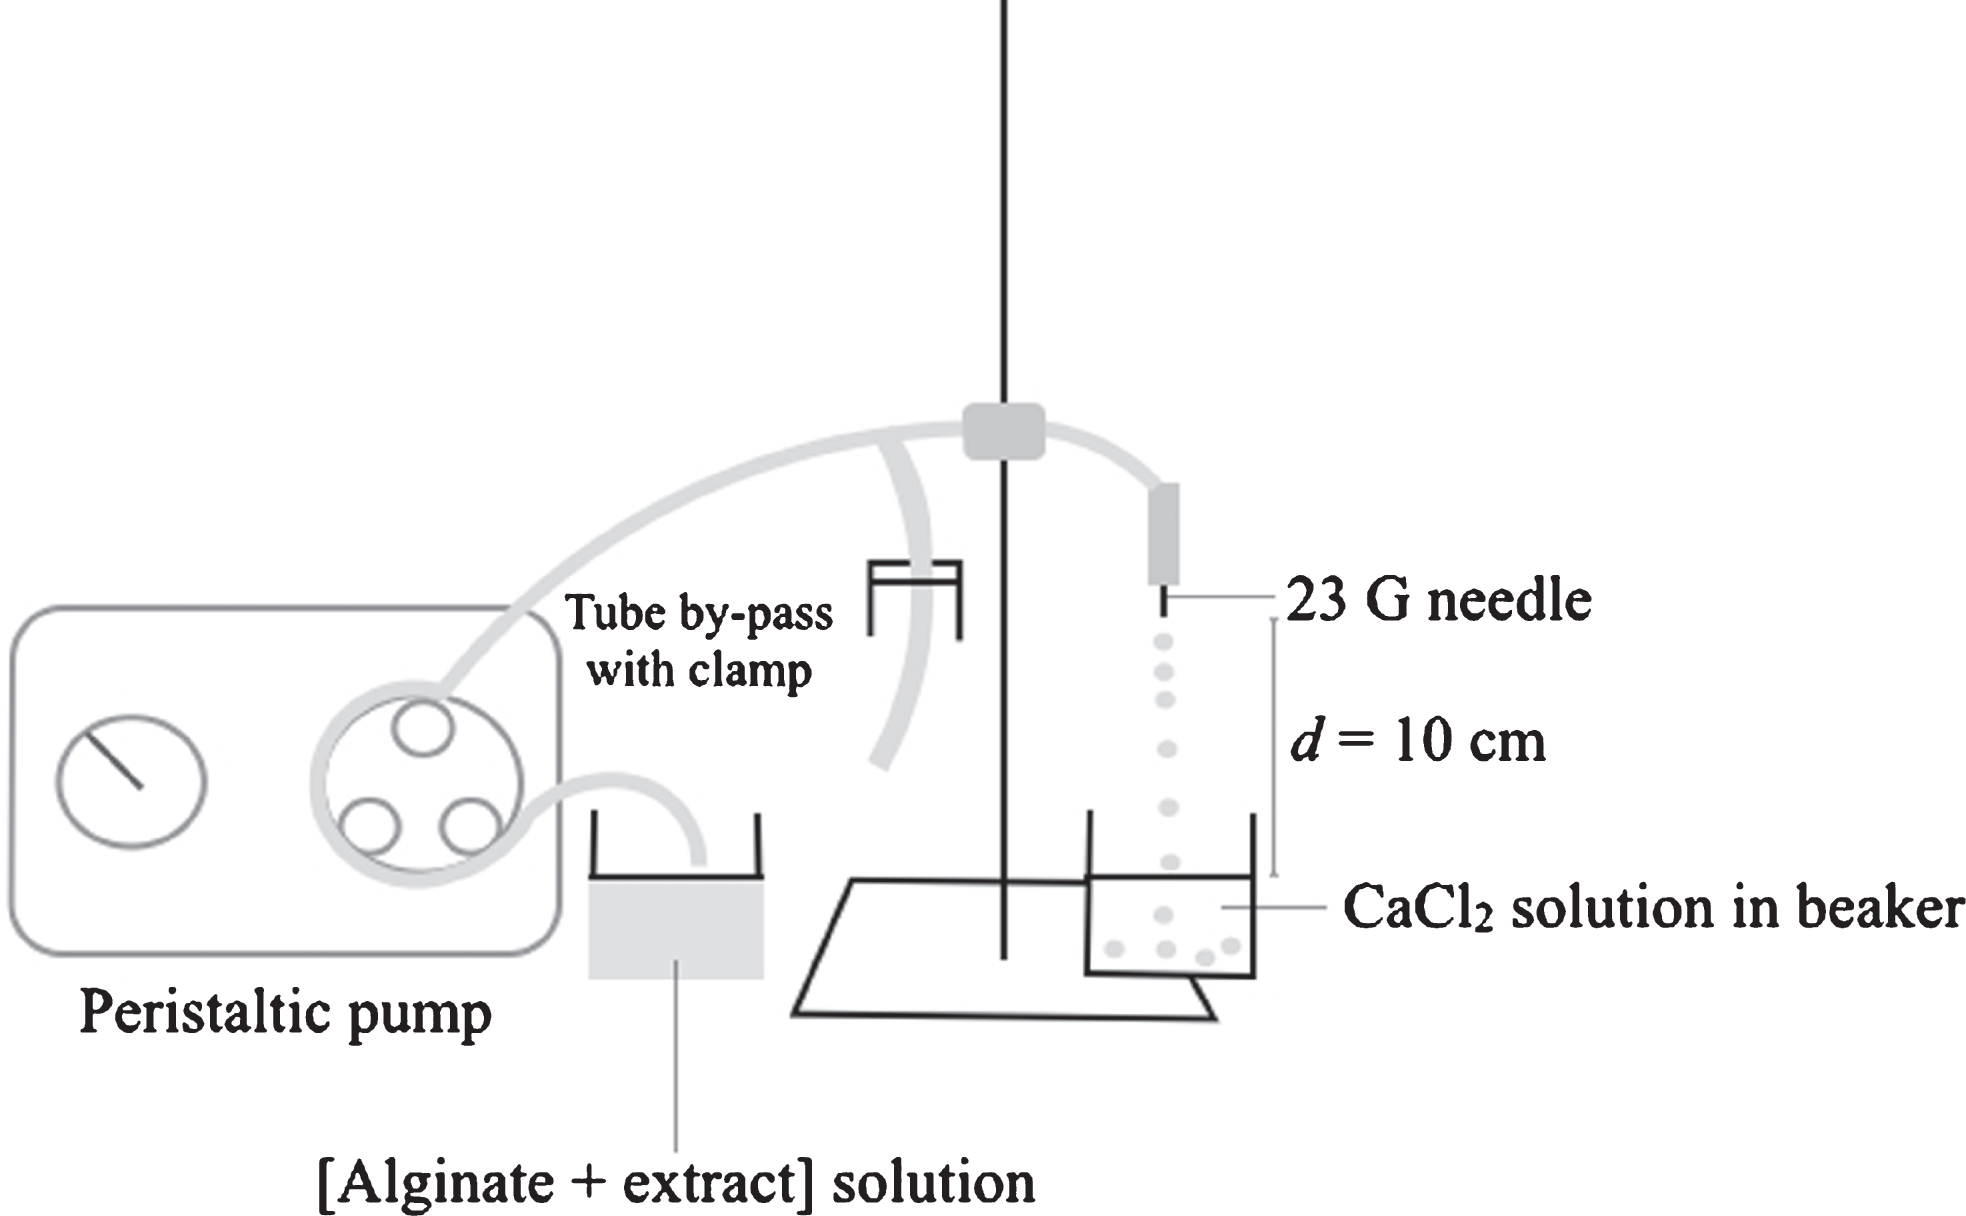 Diagram of the system used for the preparation of alginate microparticles. A tube by-pass with clamp was used for further adjustment of the flow-rate.